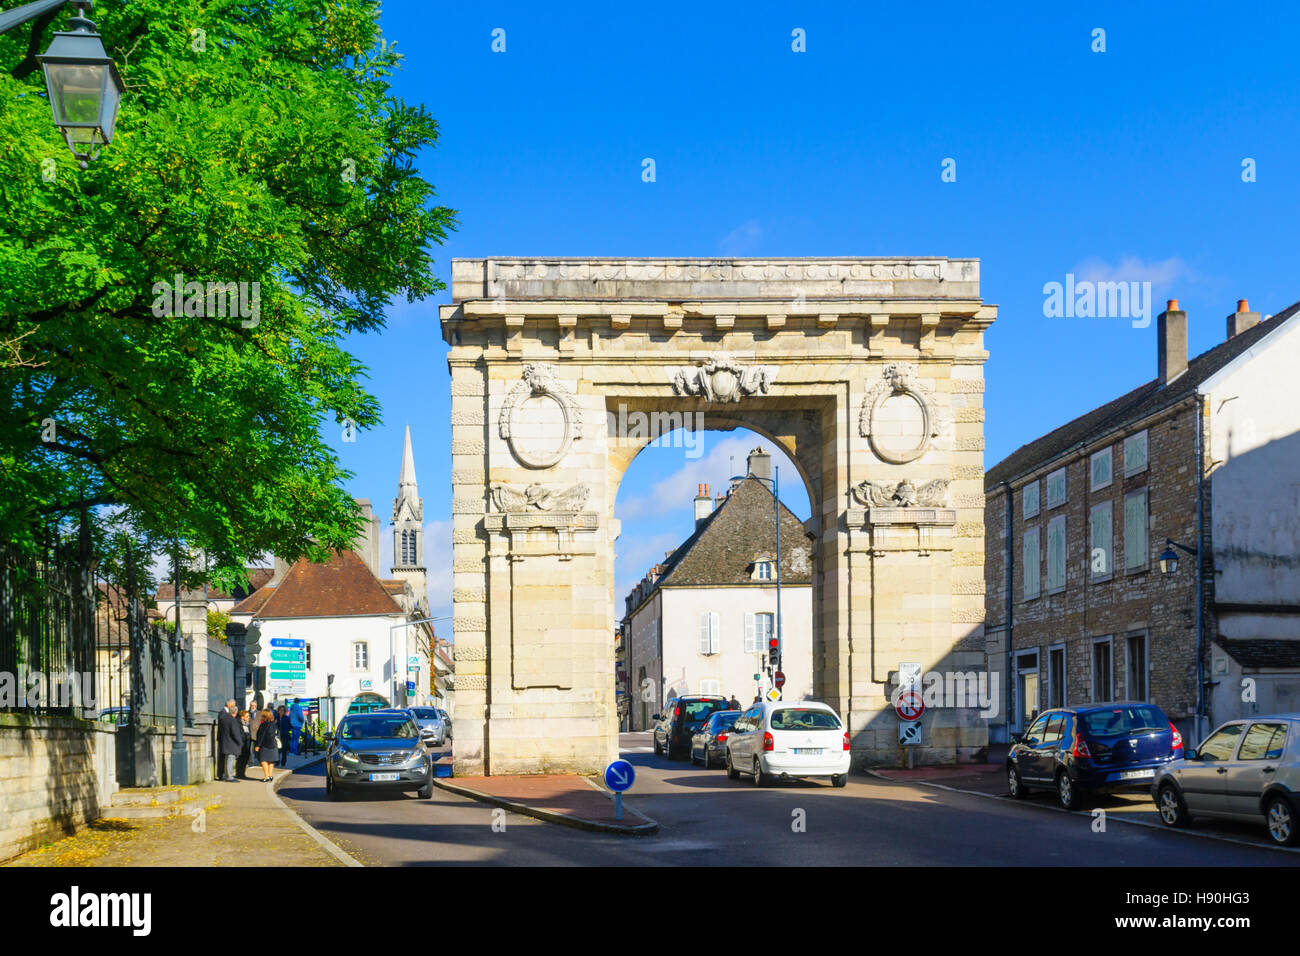 BEAUNE, FRANCE - OCTOBER 15, 2016: Scene of the St. Nicolas gate, with locals and visitors, in Beaune, Burgundy, France Stock Photo